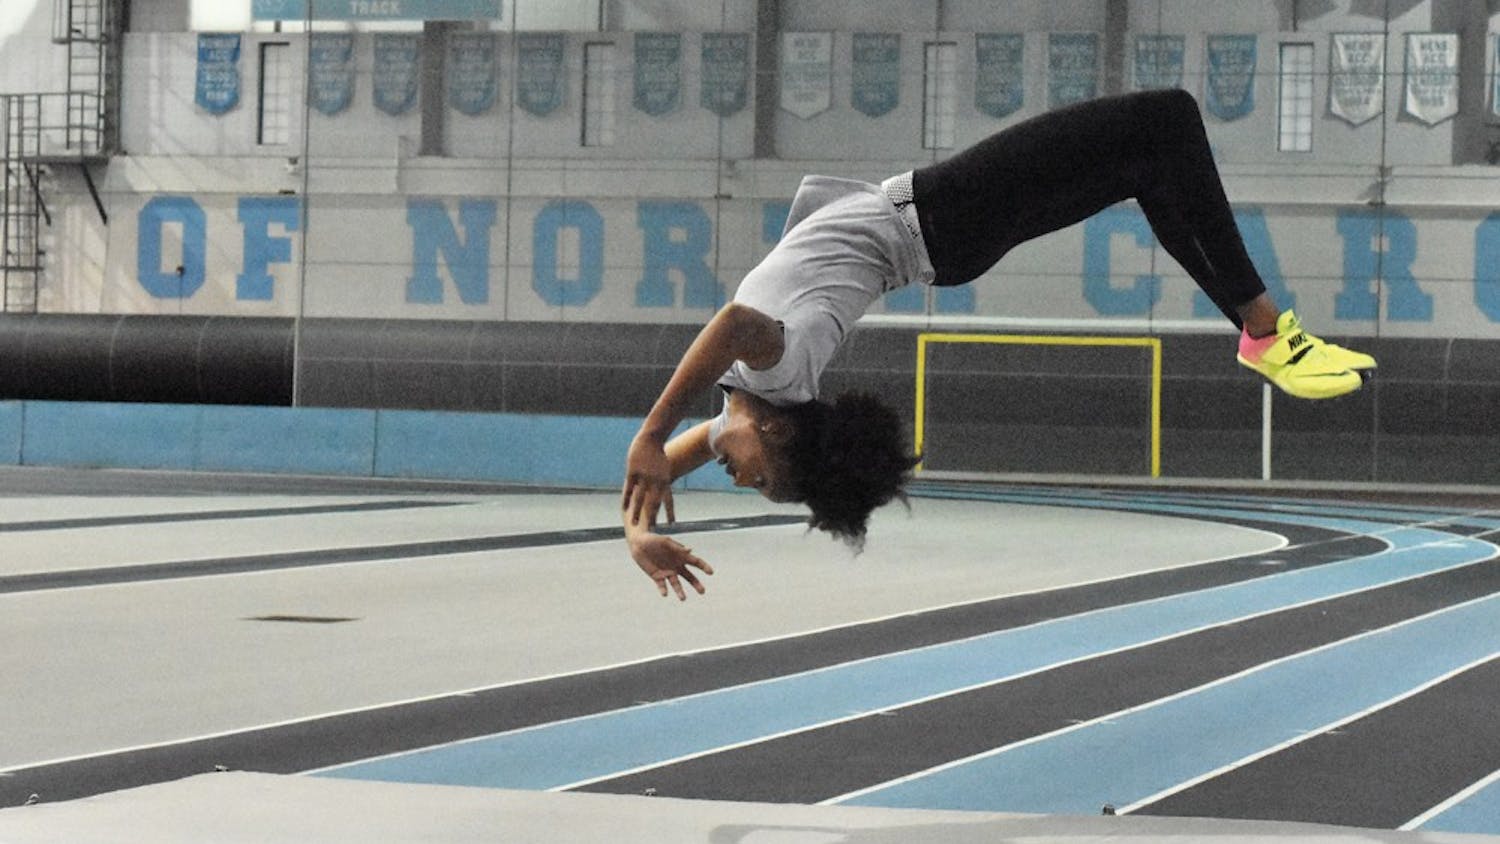 Nicole Greene, a sophomore and two-time NCAA championship-qualifier, practices for the high jump. She has made the Dean’s List each of her three semesters at UNC.